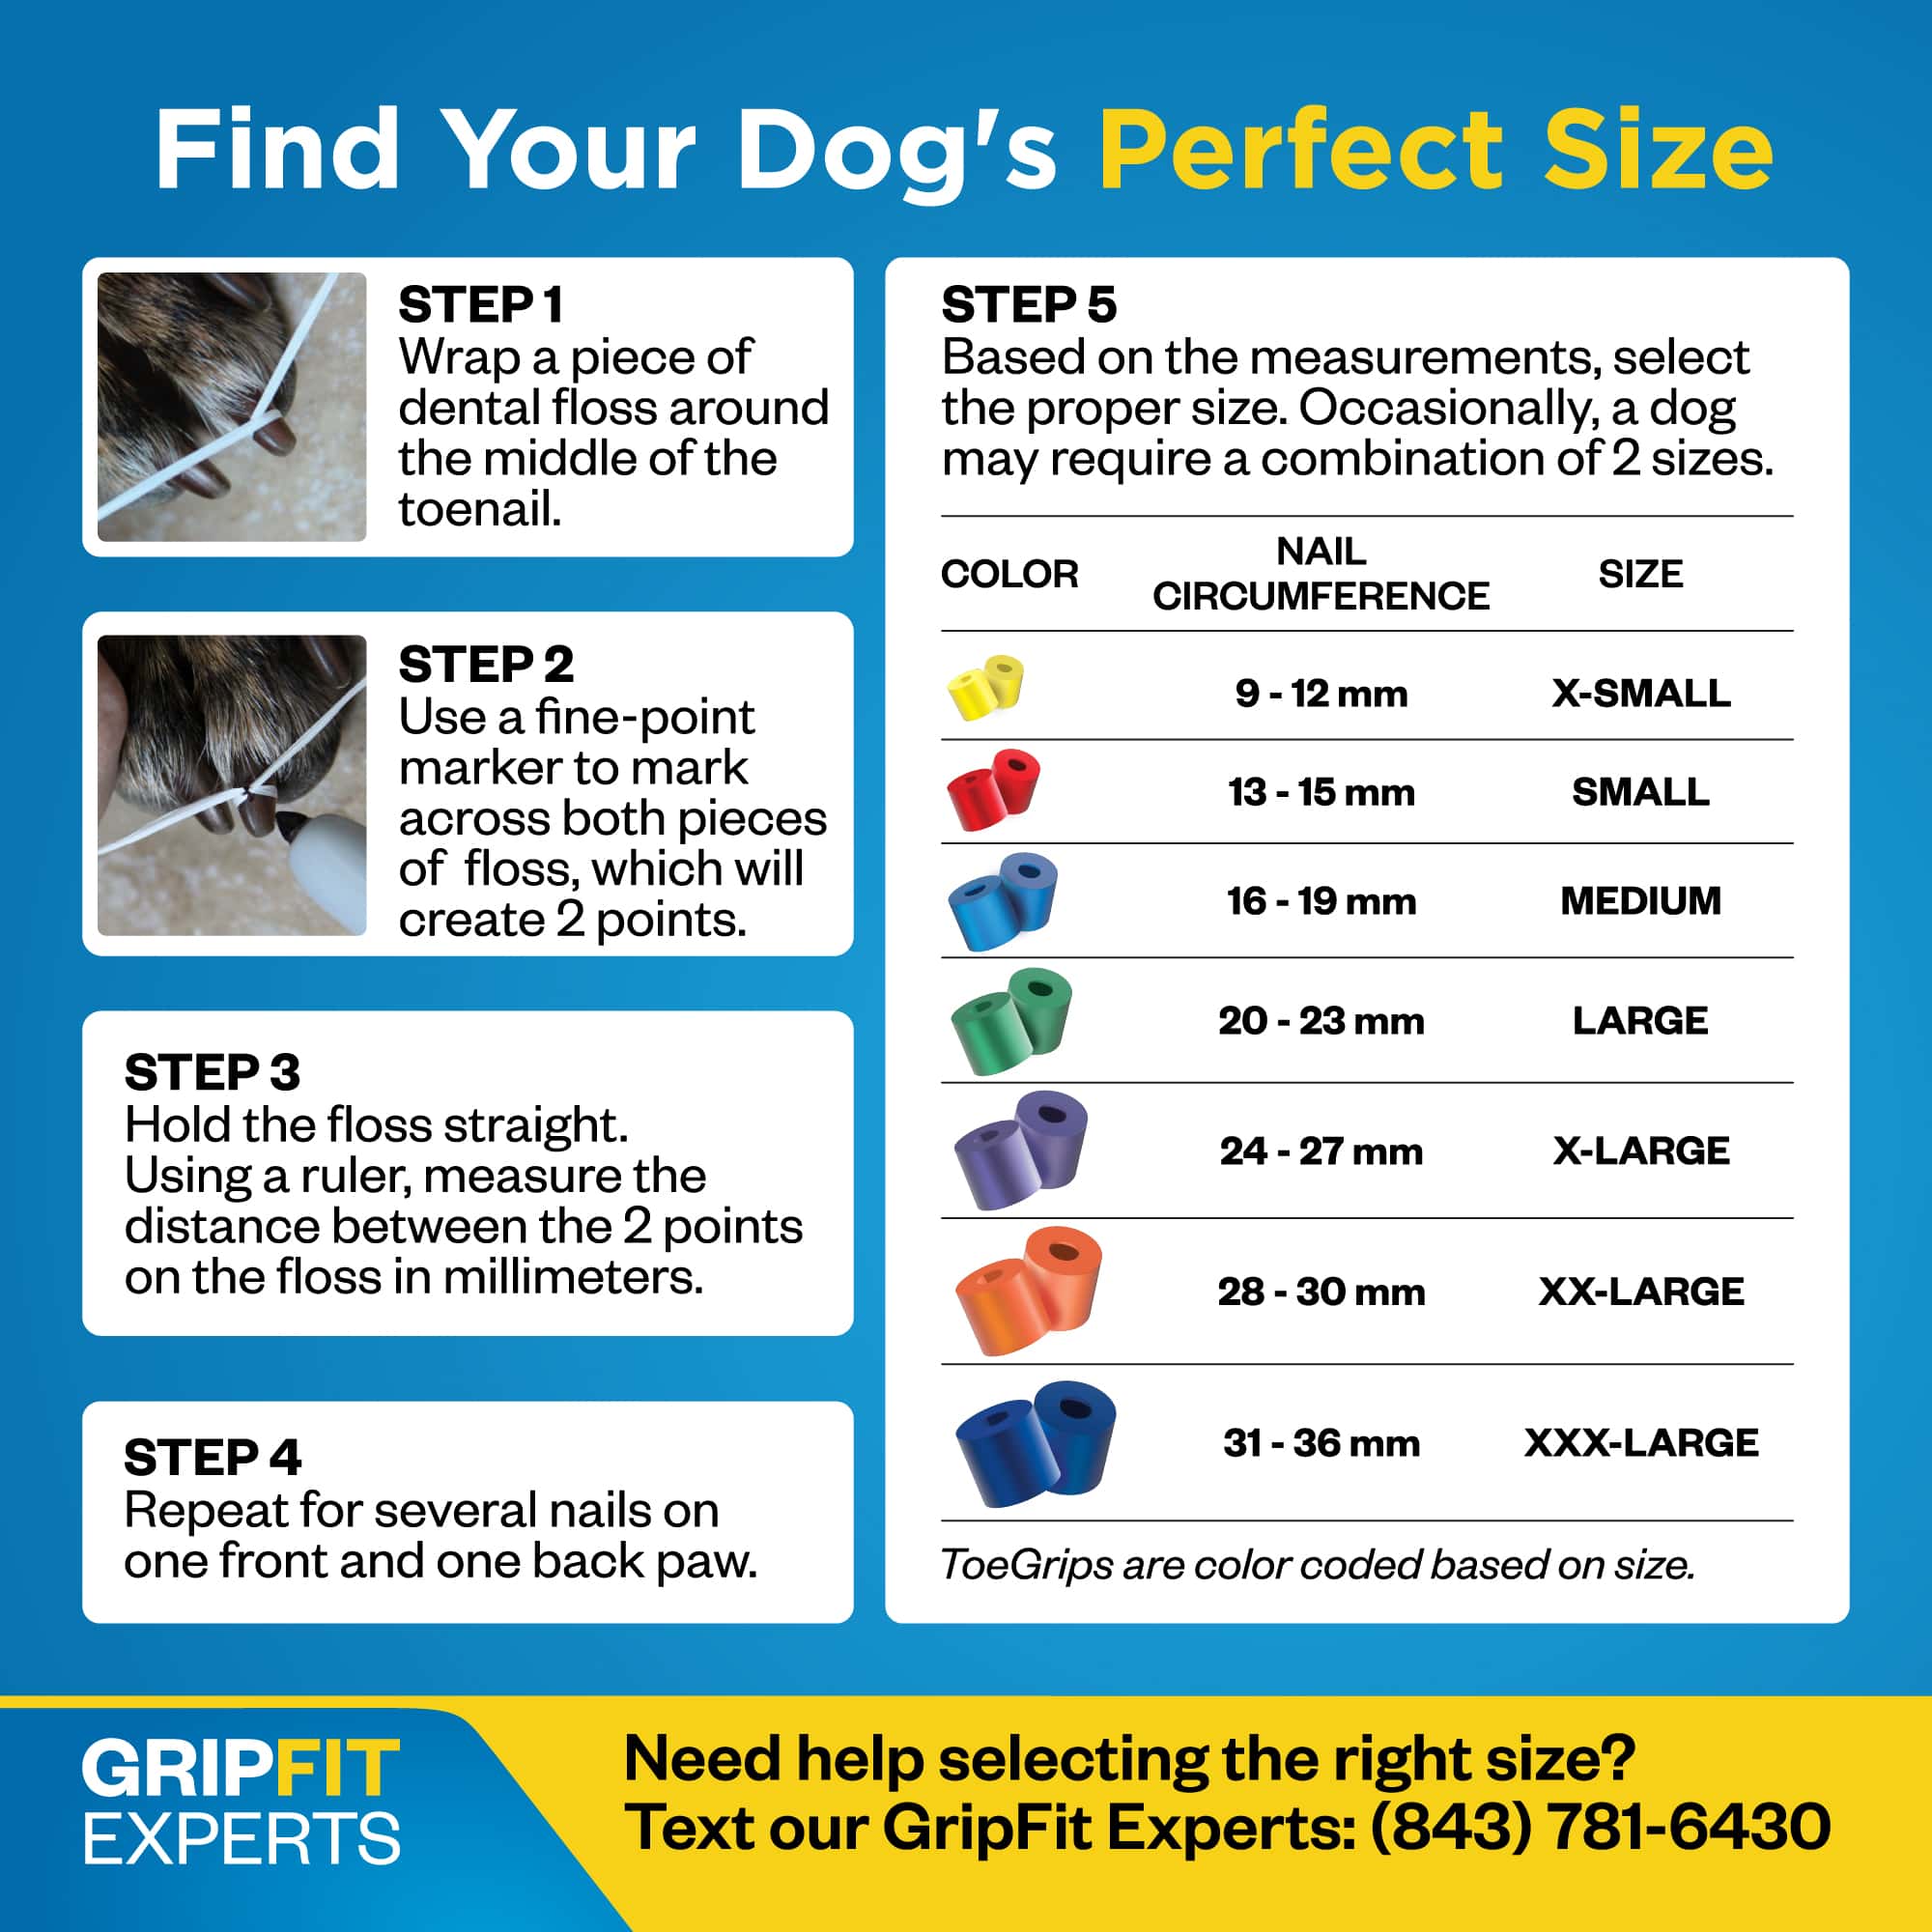 https://toegrips.com/wp-content/uploads/Find-your-dog-toegrips-size-measuring-instructions.jpg